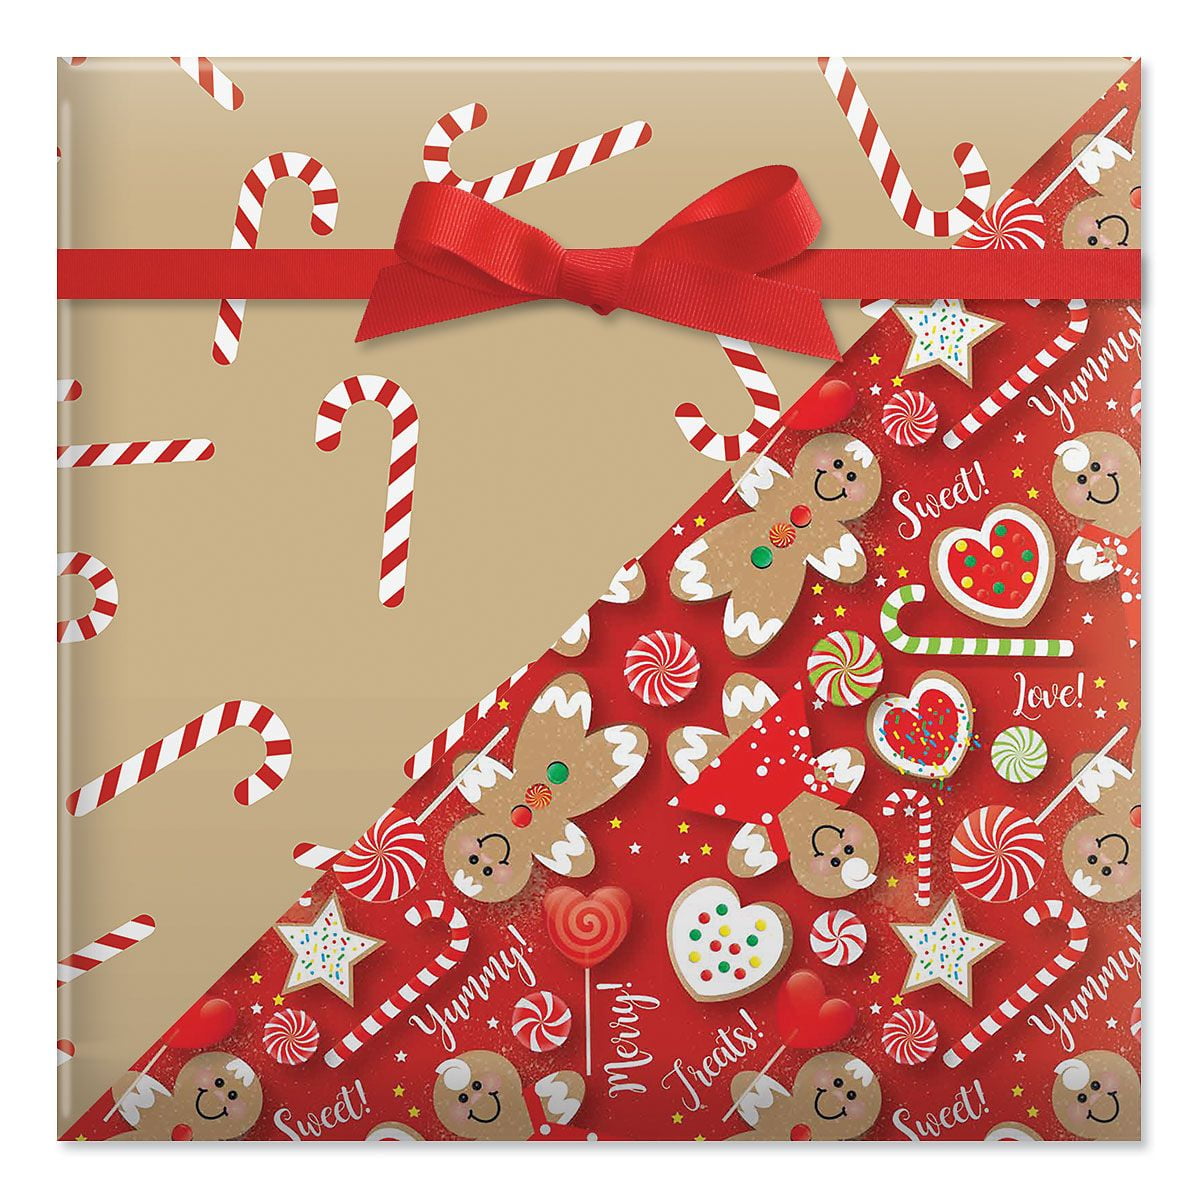 Current Decked Out Decor Jumbo Rolled Gift Wrap